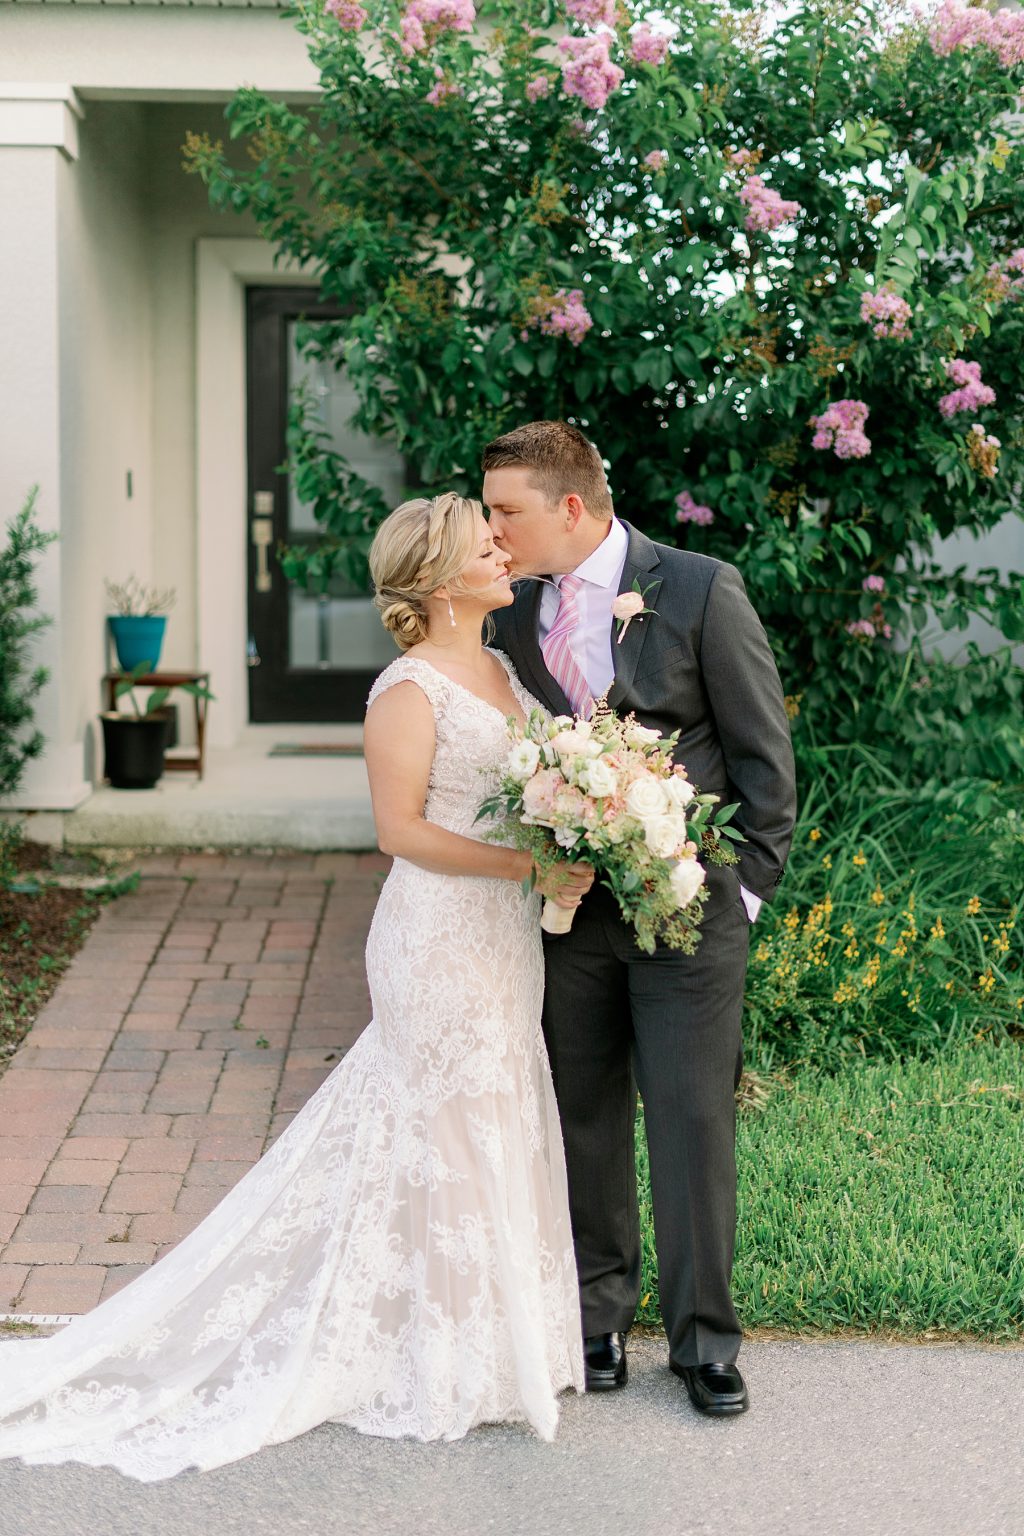 A COVID Wedding with the Creglows - Kristen Weaver Photography